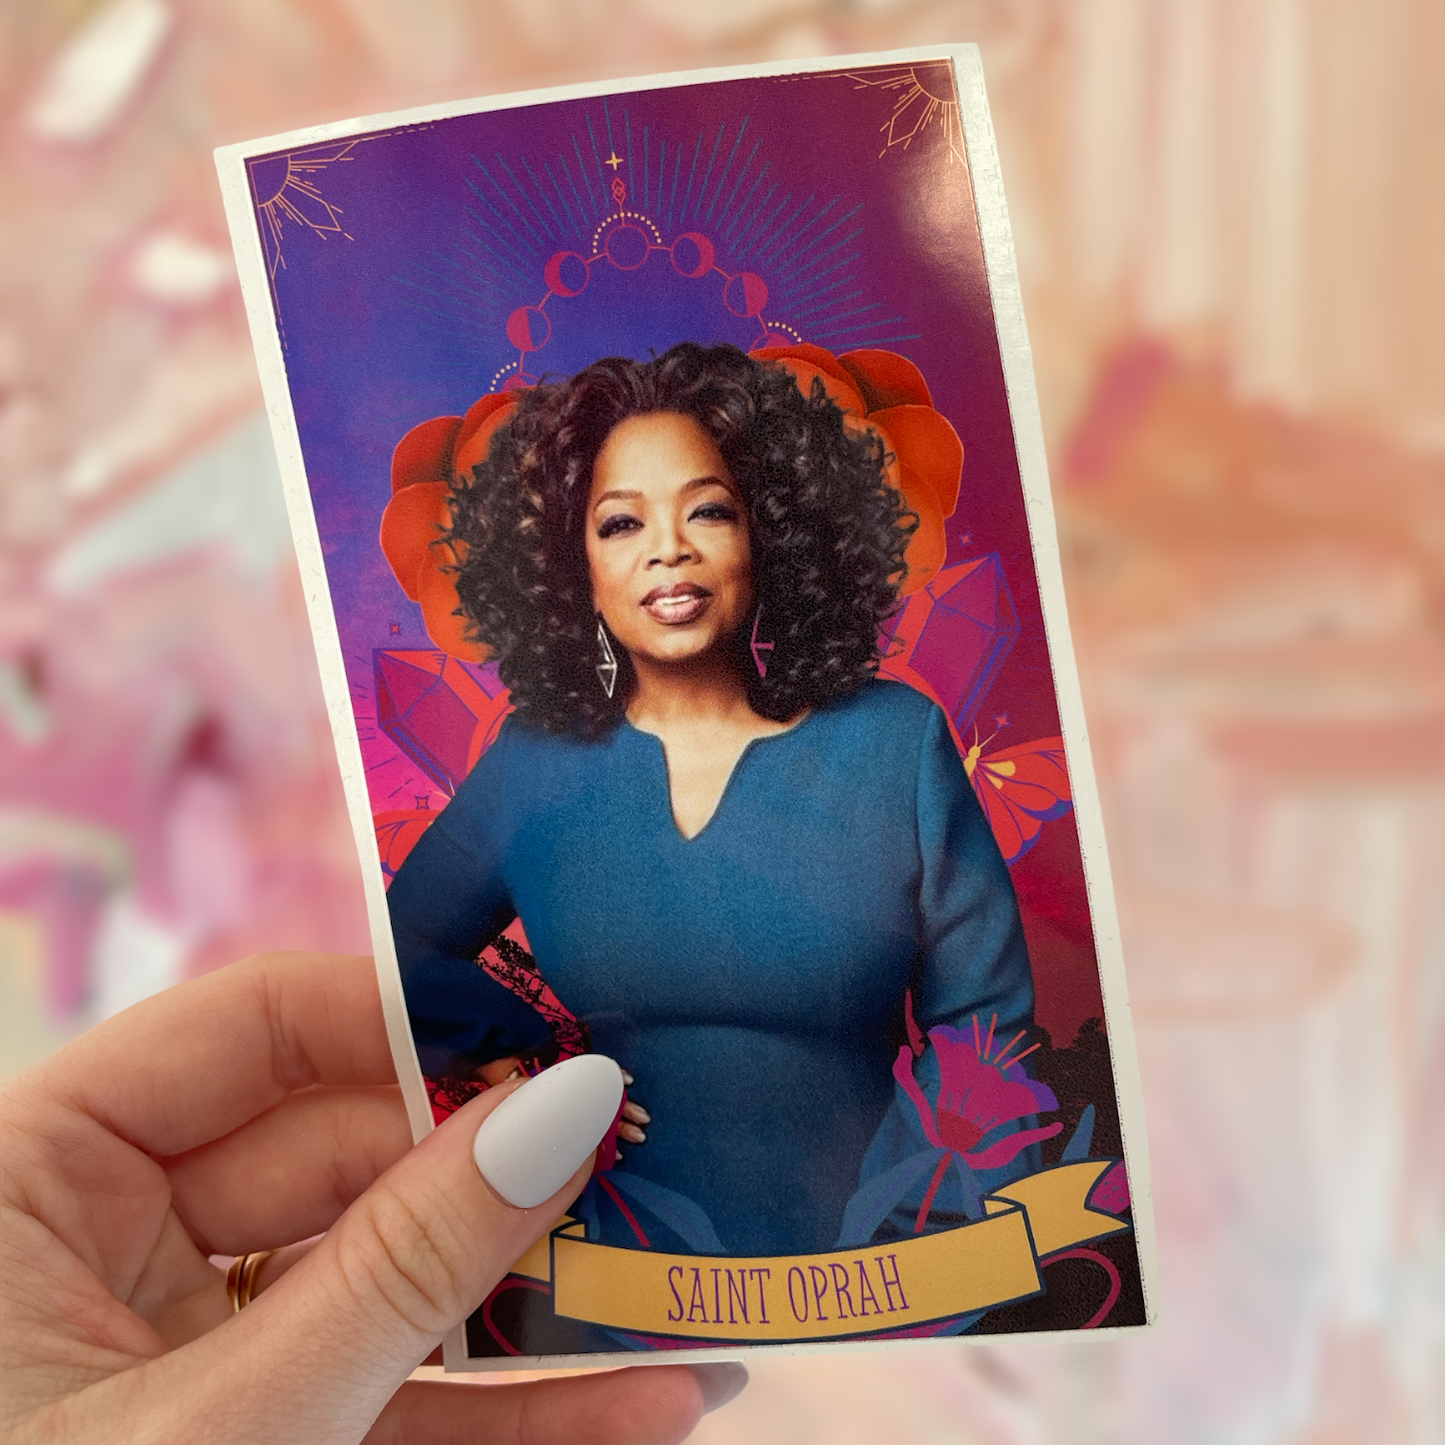 The Luminary Oprah Altar Candle